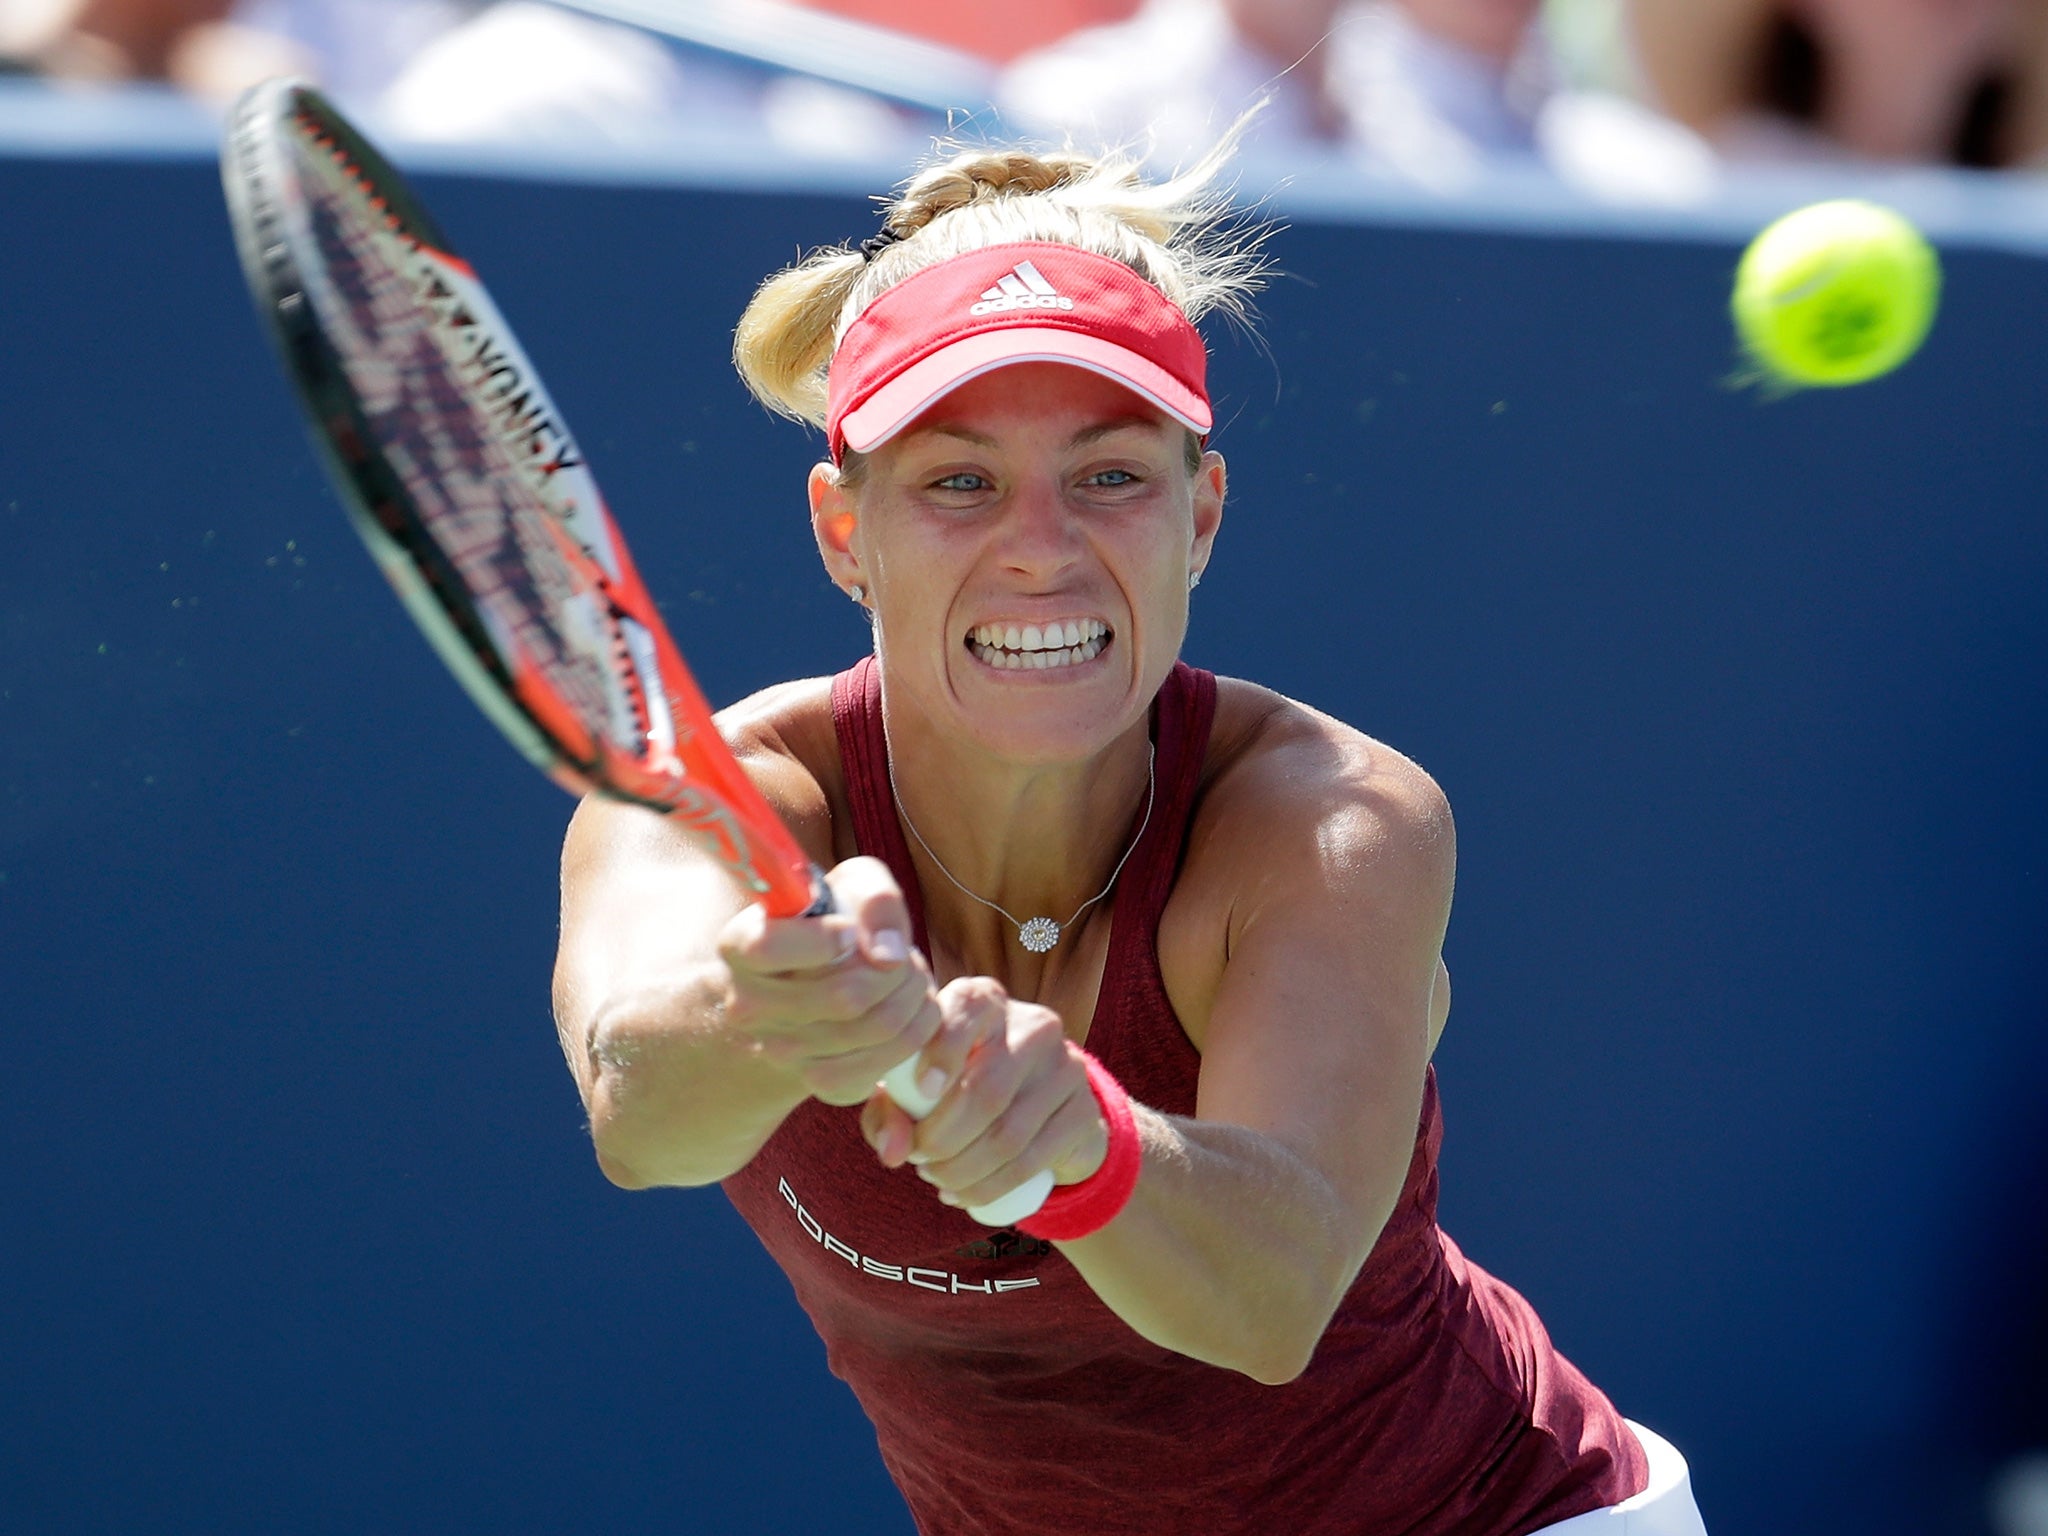 Kerber hits a return in this month's Western & Southern Open final